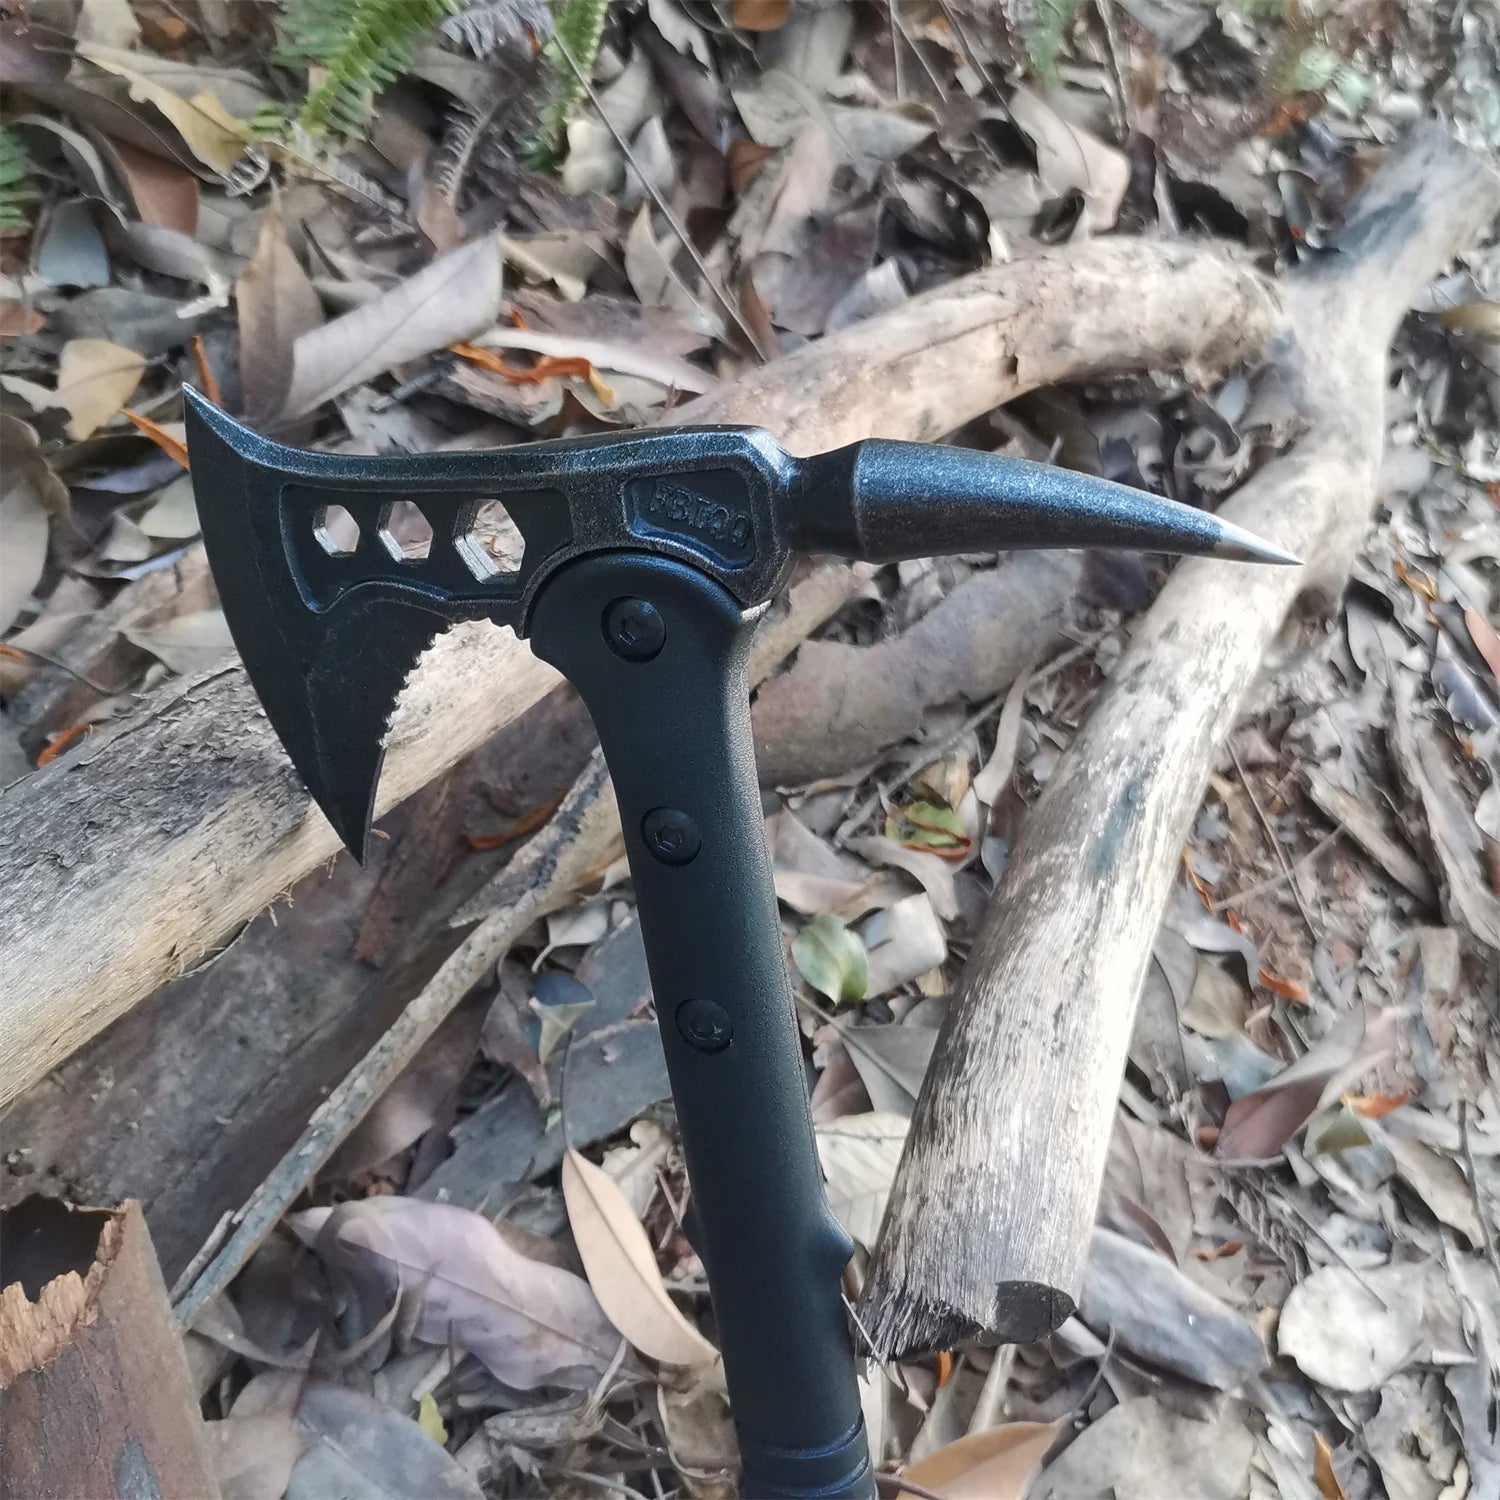 Camping Hatchet, Forged Steel Construction Survival Hatchet, with Nylon Sheath, Anti-Slip & Shock Reduction Grip, Tactical Axe